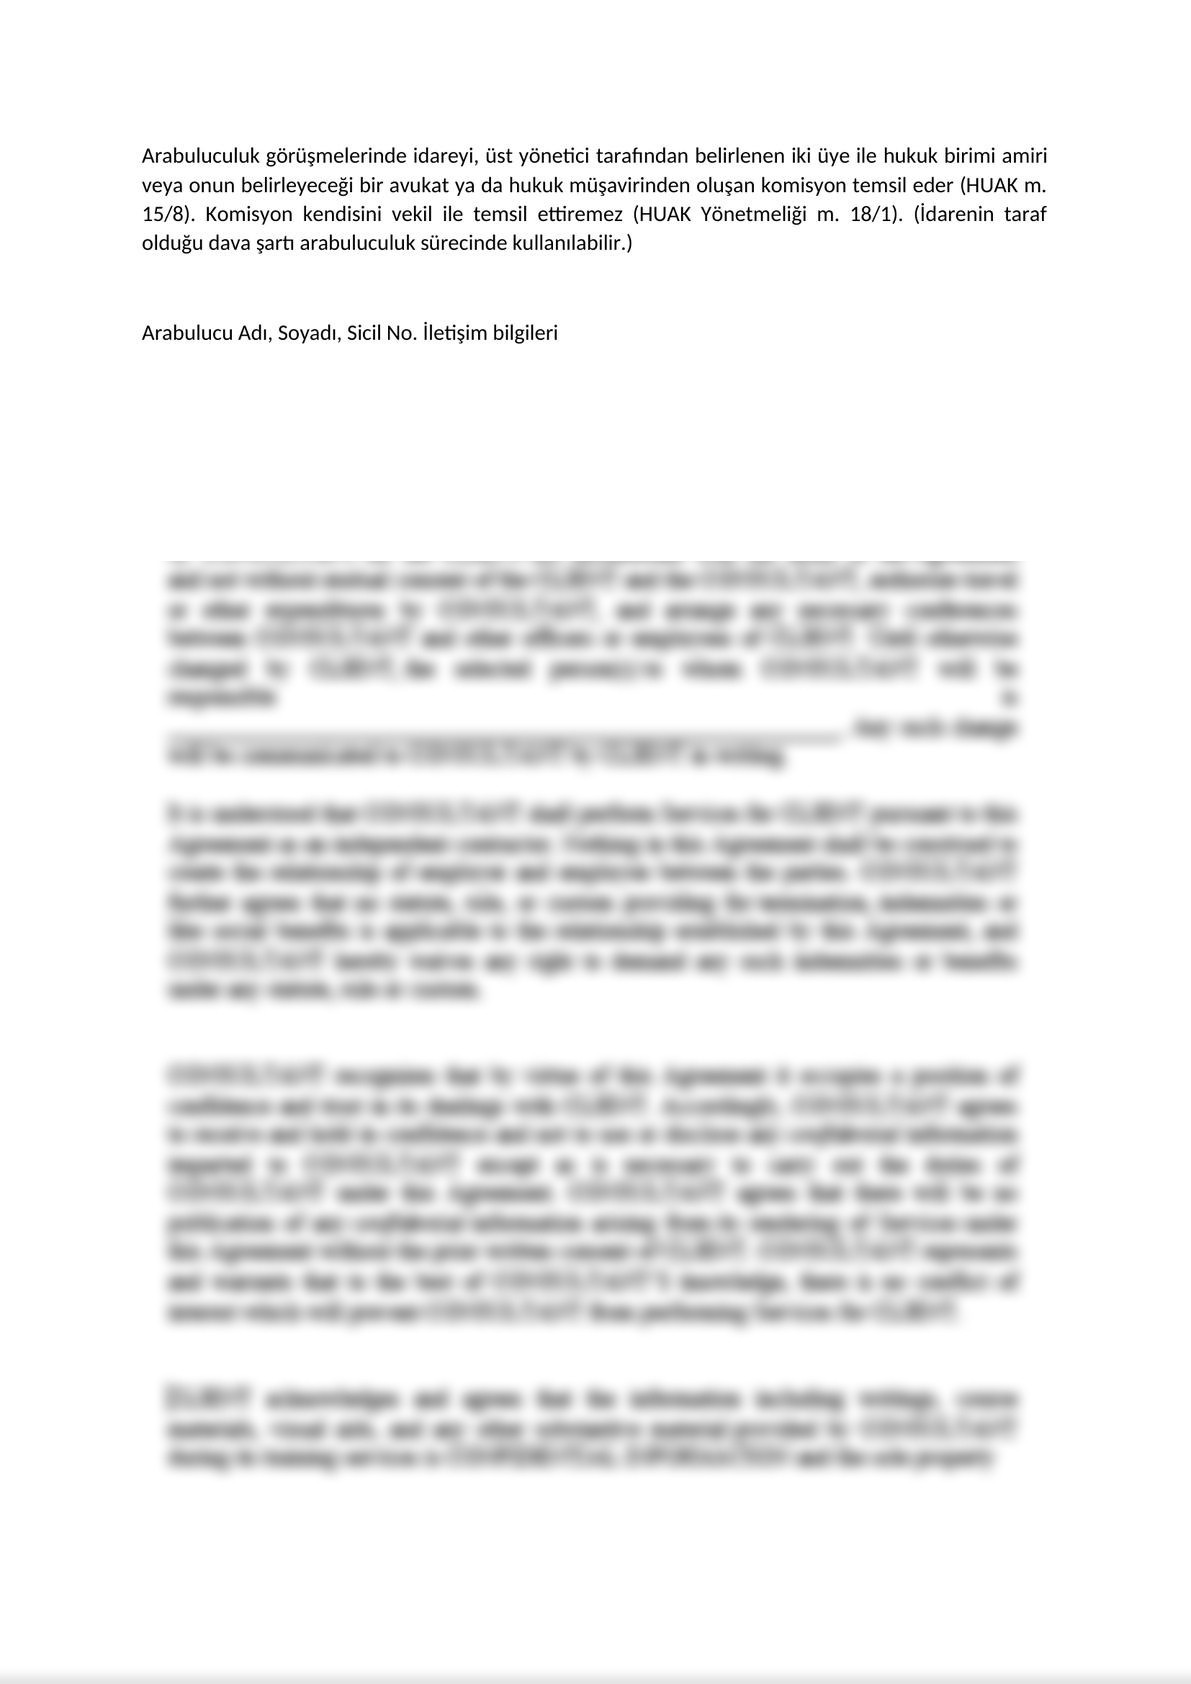 Invitatition Letter to Parties of Mandatory Mediation on Commercial Disputes - Turkish -2